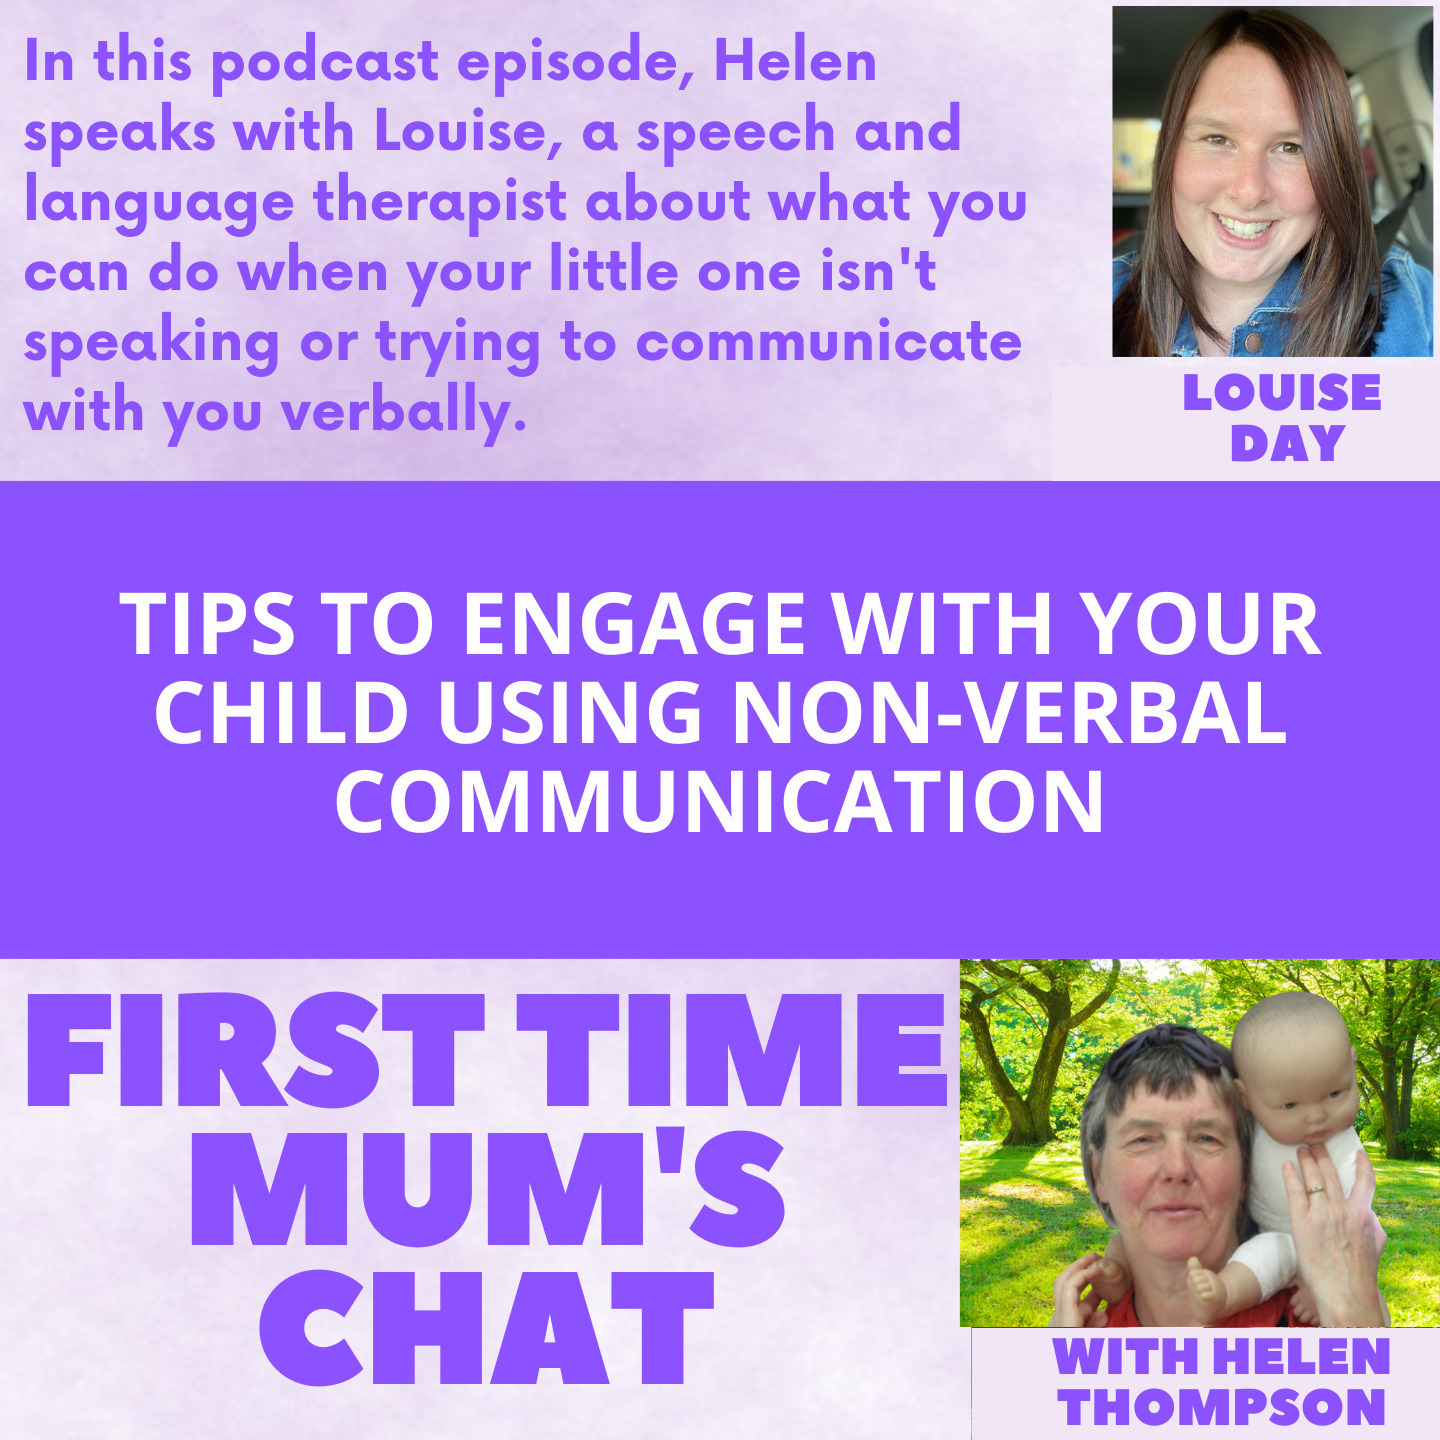 Tips To Engage With Your Child Using Non-Verbal Communication